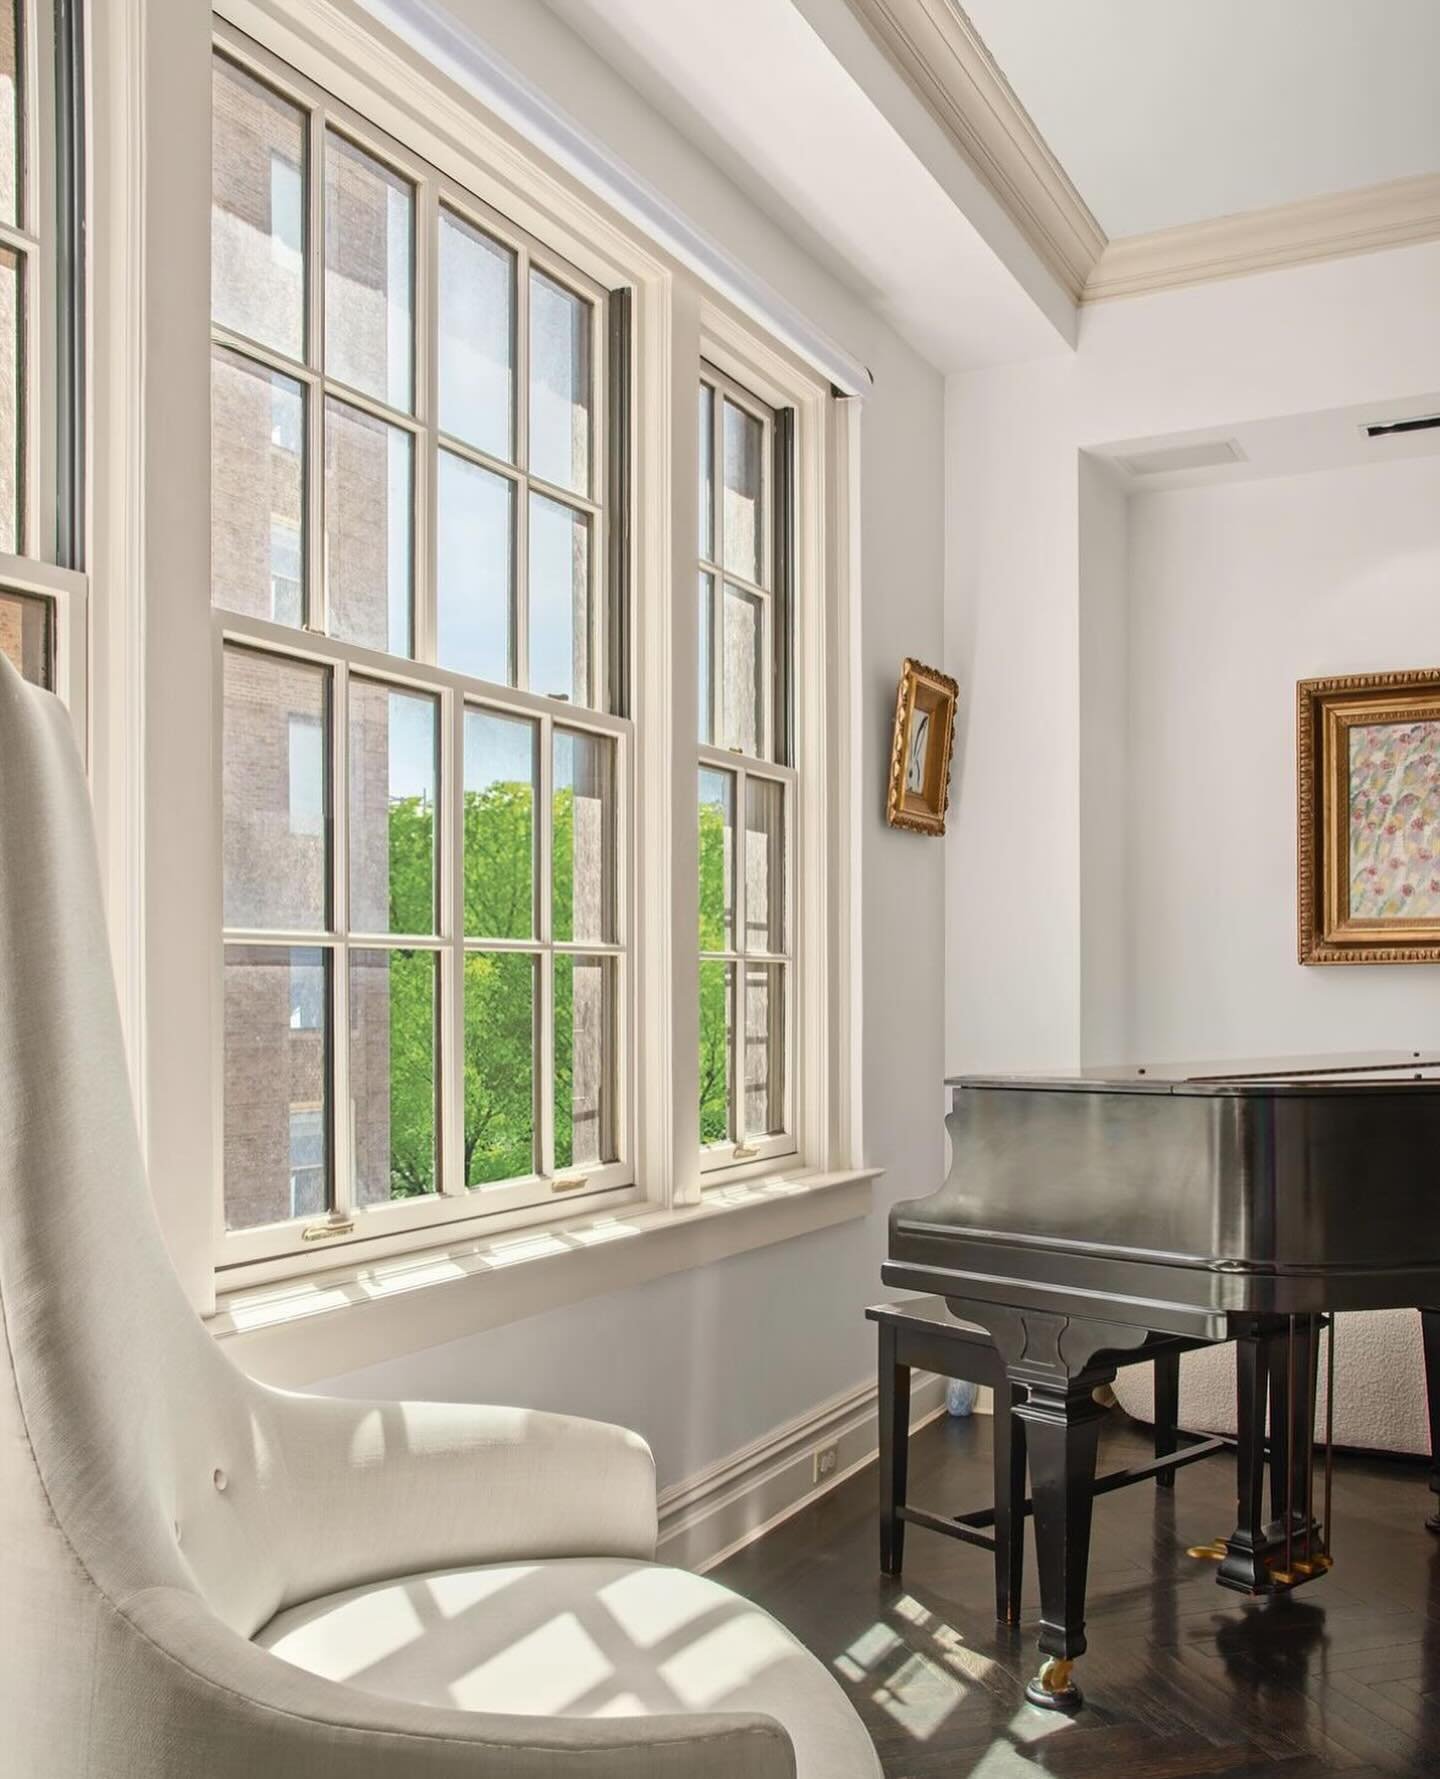 Basking in southern exposures in this immaculate two-bedroom, two-bathroom home features elite craftsmanship and attention to historic detail.

1140 5th Ave, 8C
Offered at: $2,495,000

For more details please get in touch directly @hudsonadvisory @hu